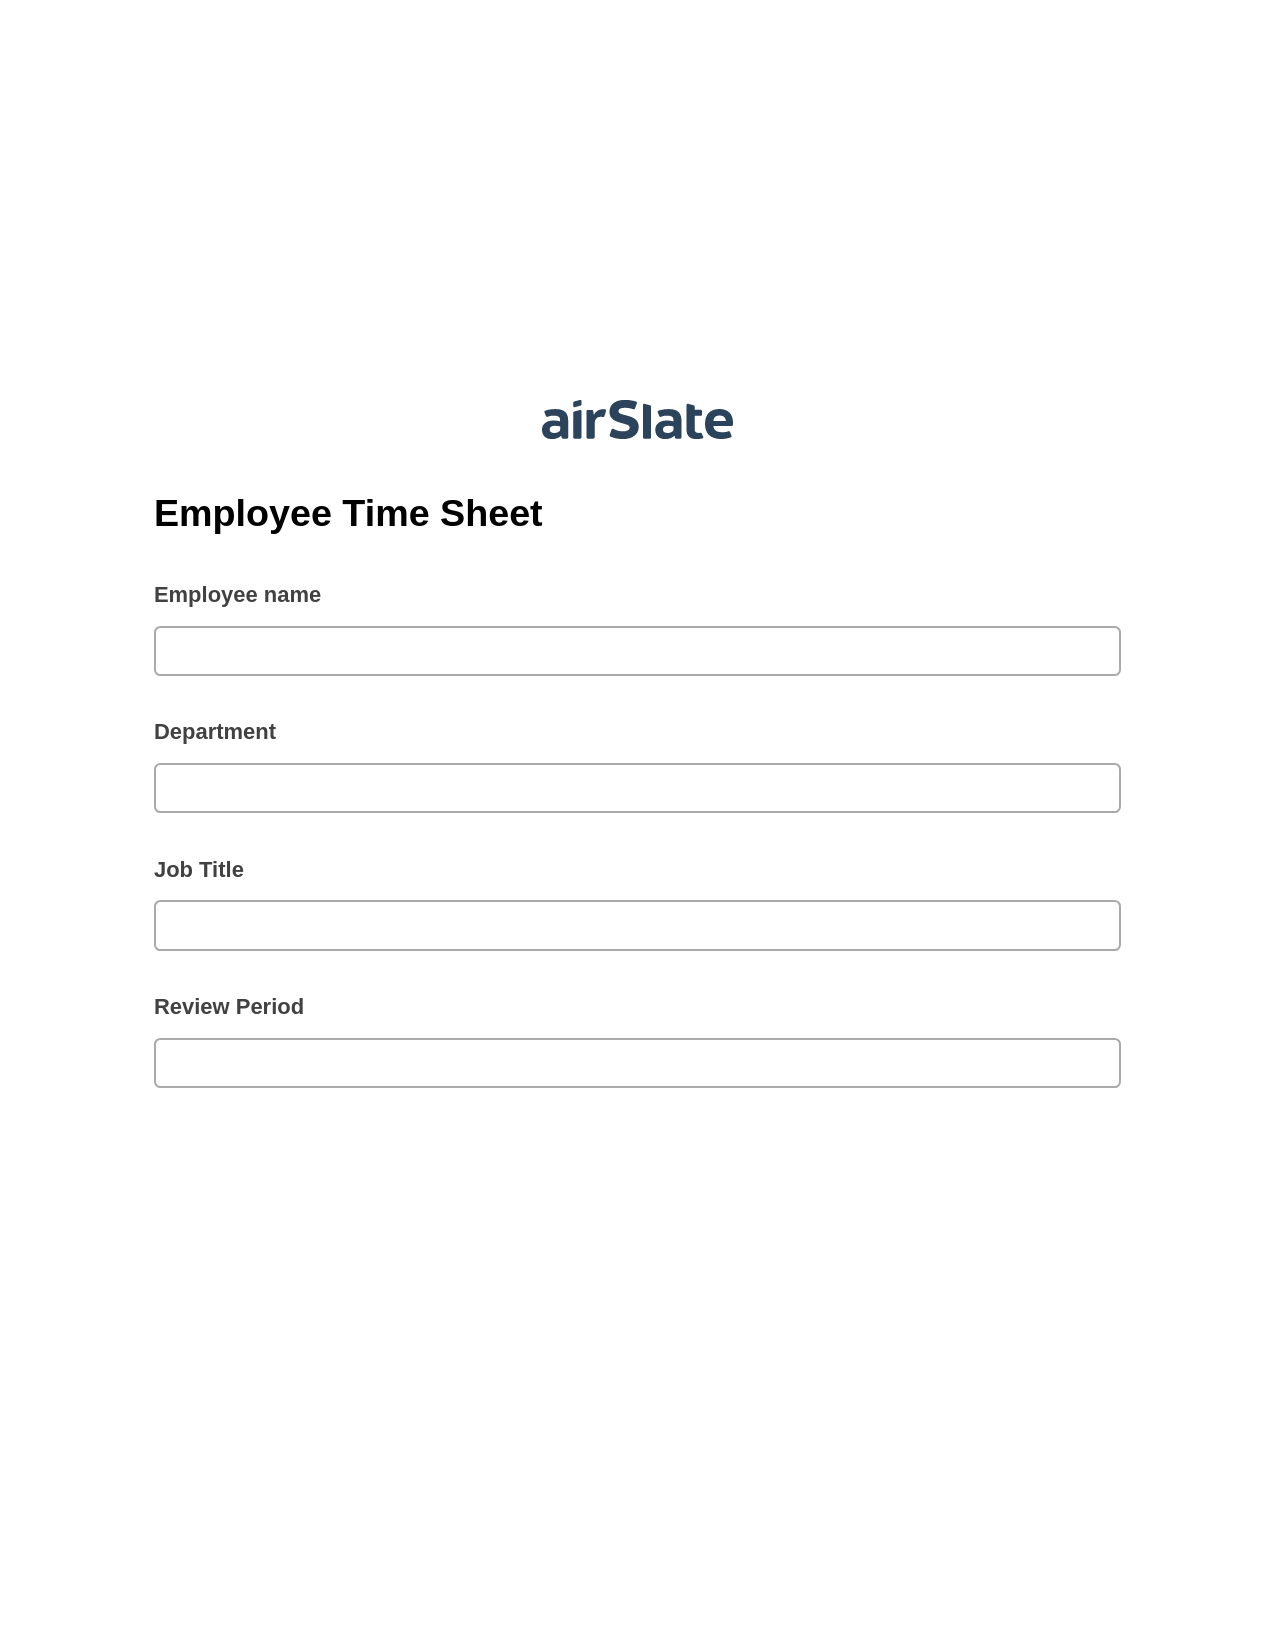 Multirole Employee Time Sheet Pre-fill from CSV File Bot, Create slate addon, Archive to Google Drive Bot